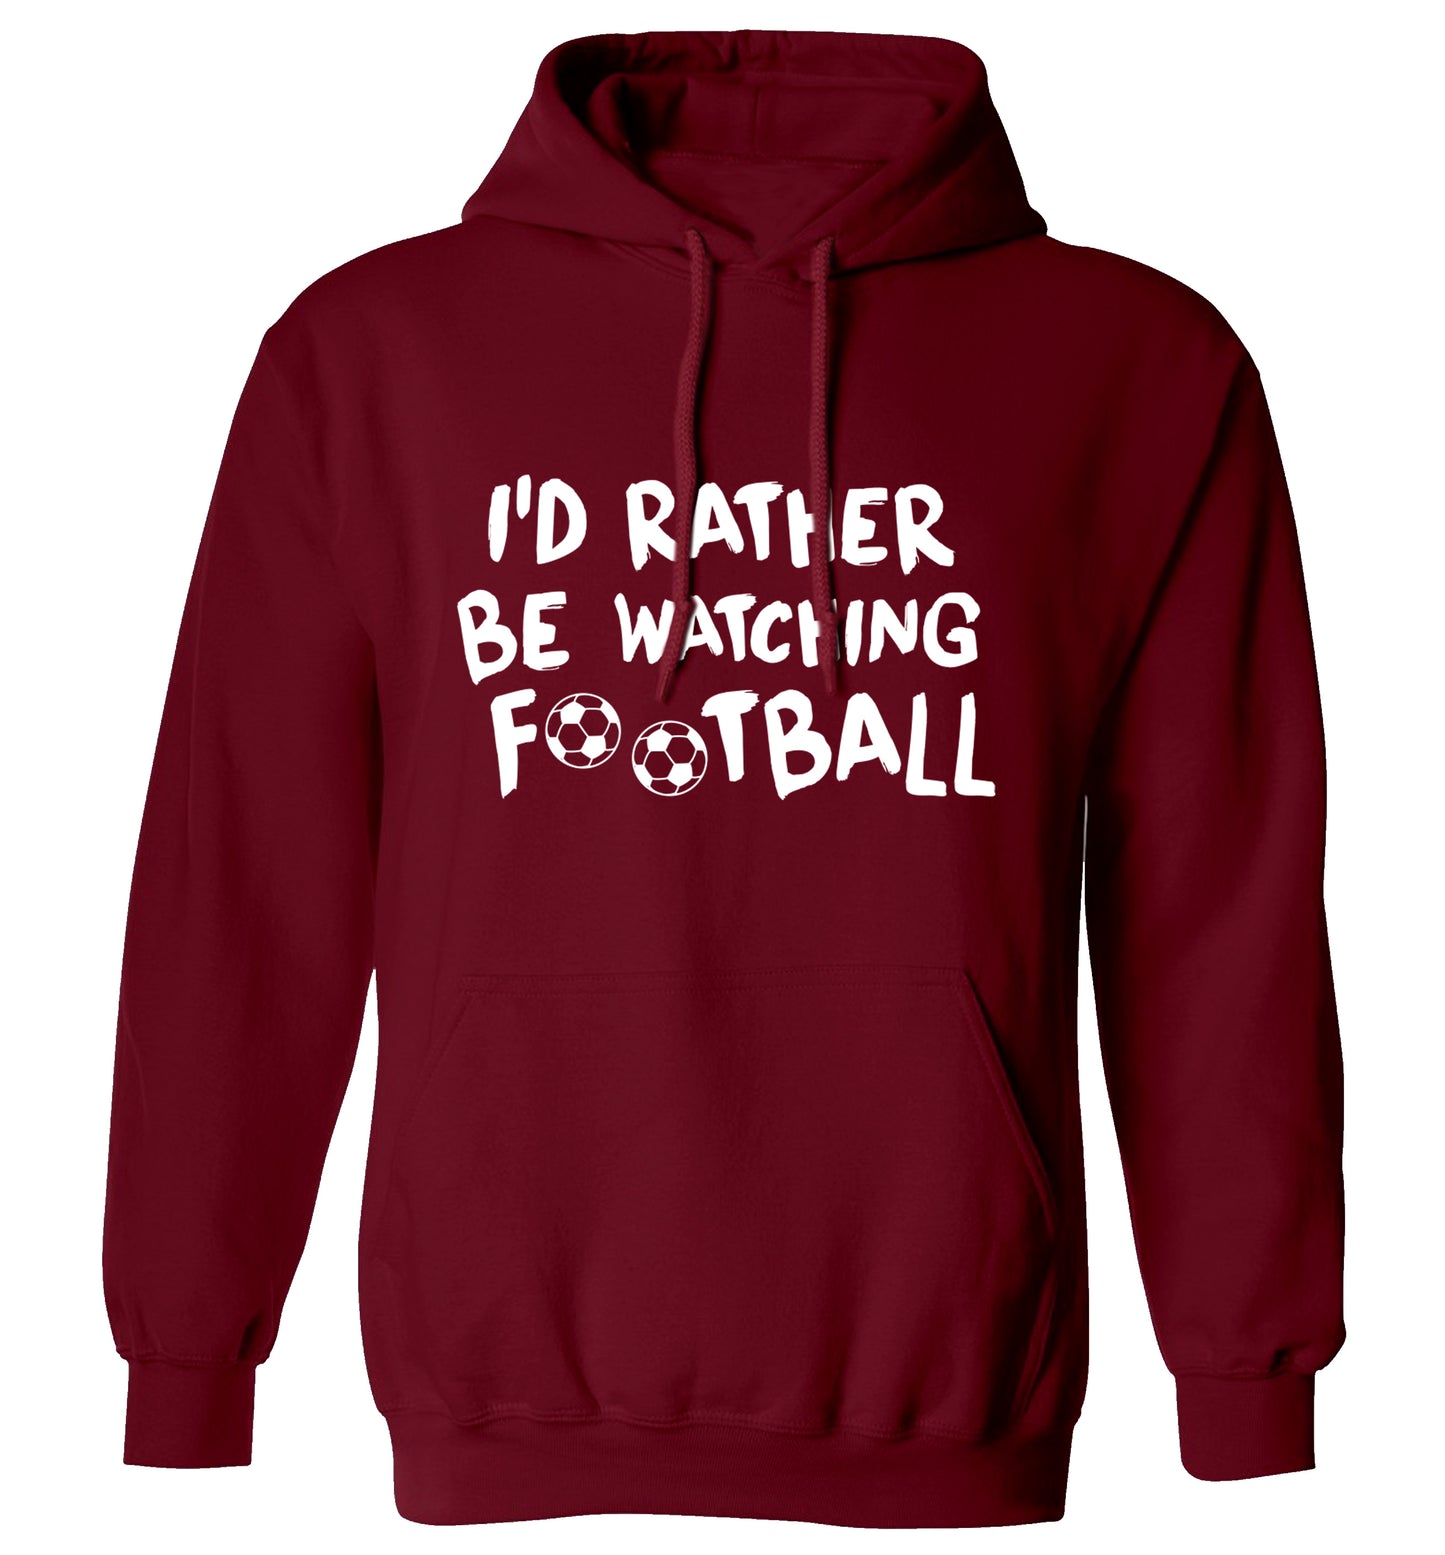 I'd rather be watching football adults unisexmaroon hoodie 2XL